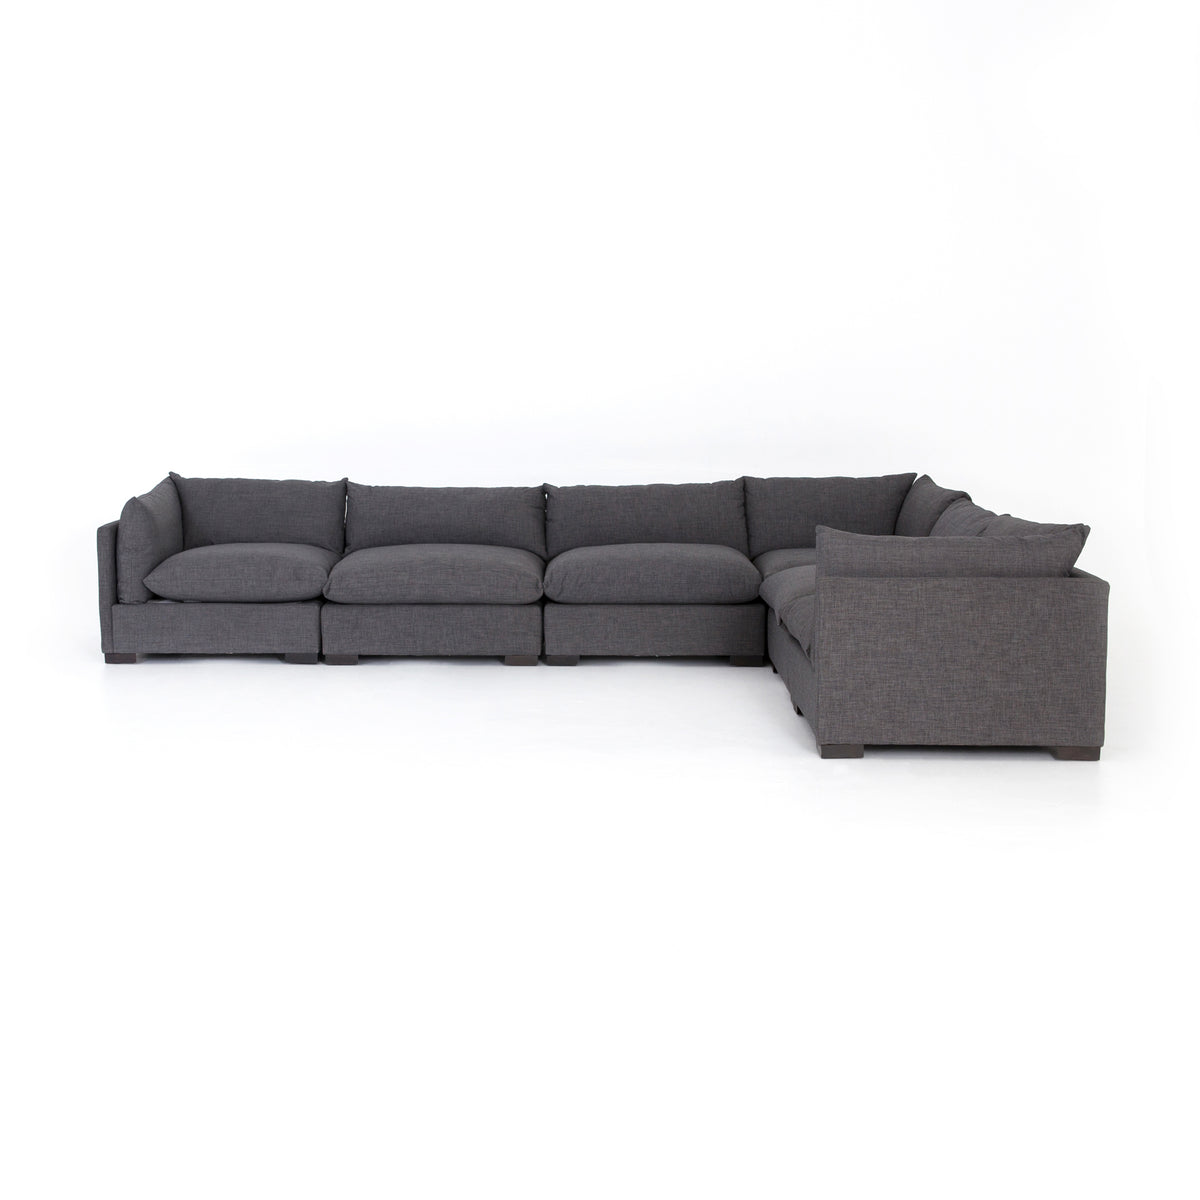 Westwood 6-Pc Sectional Bennett Charcoal - Be Bold Furniture